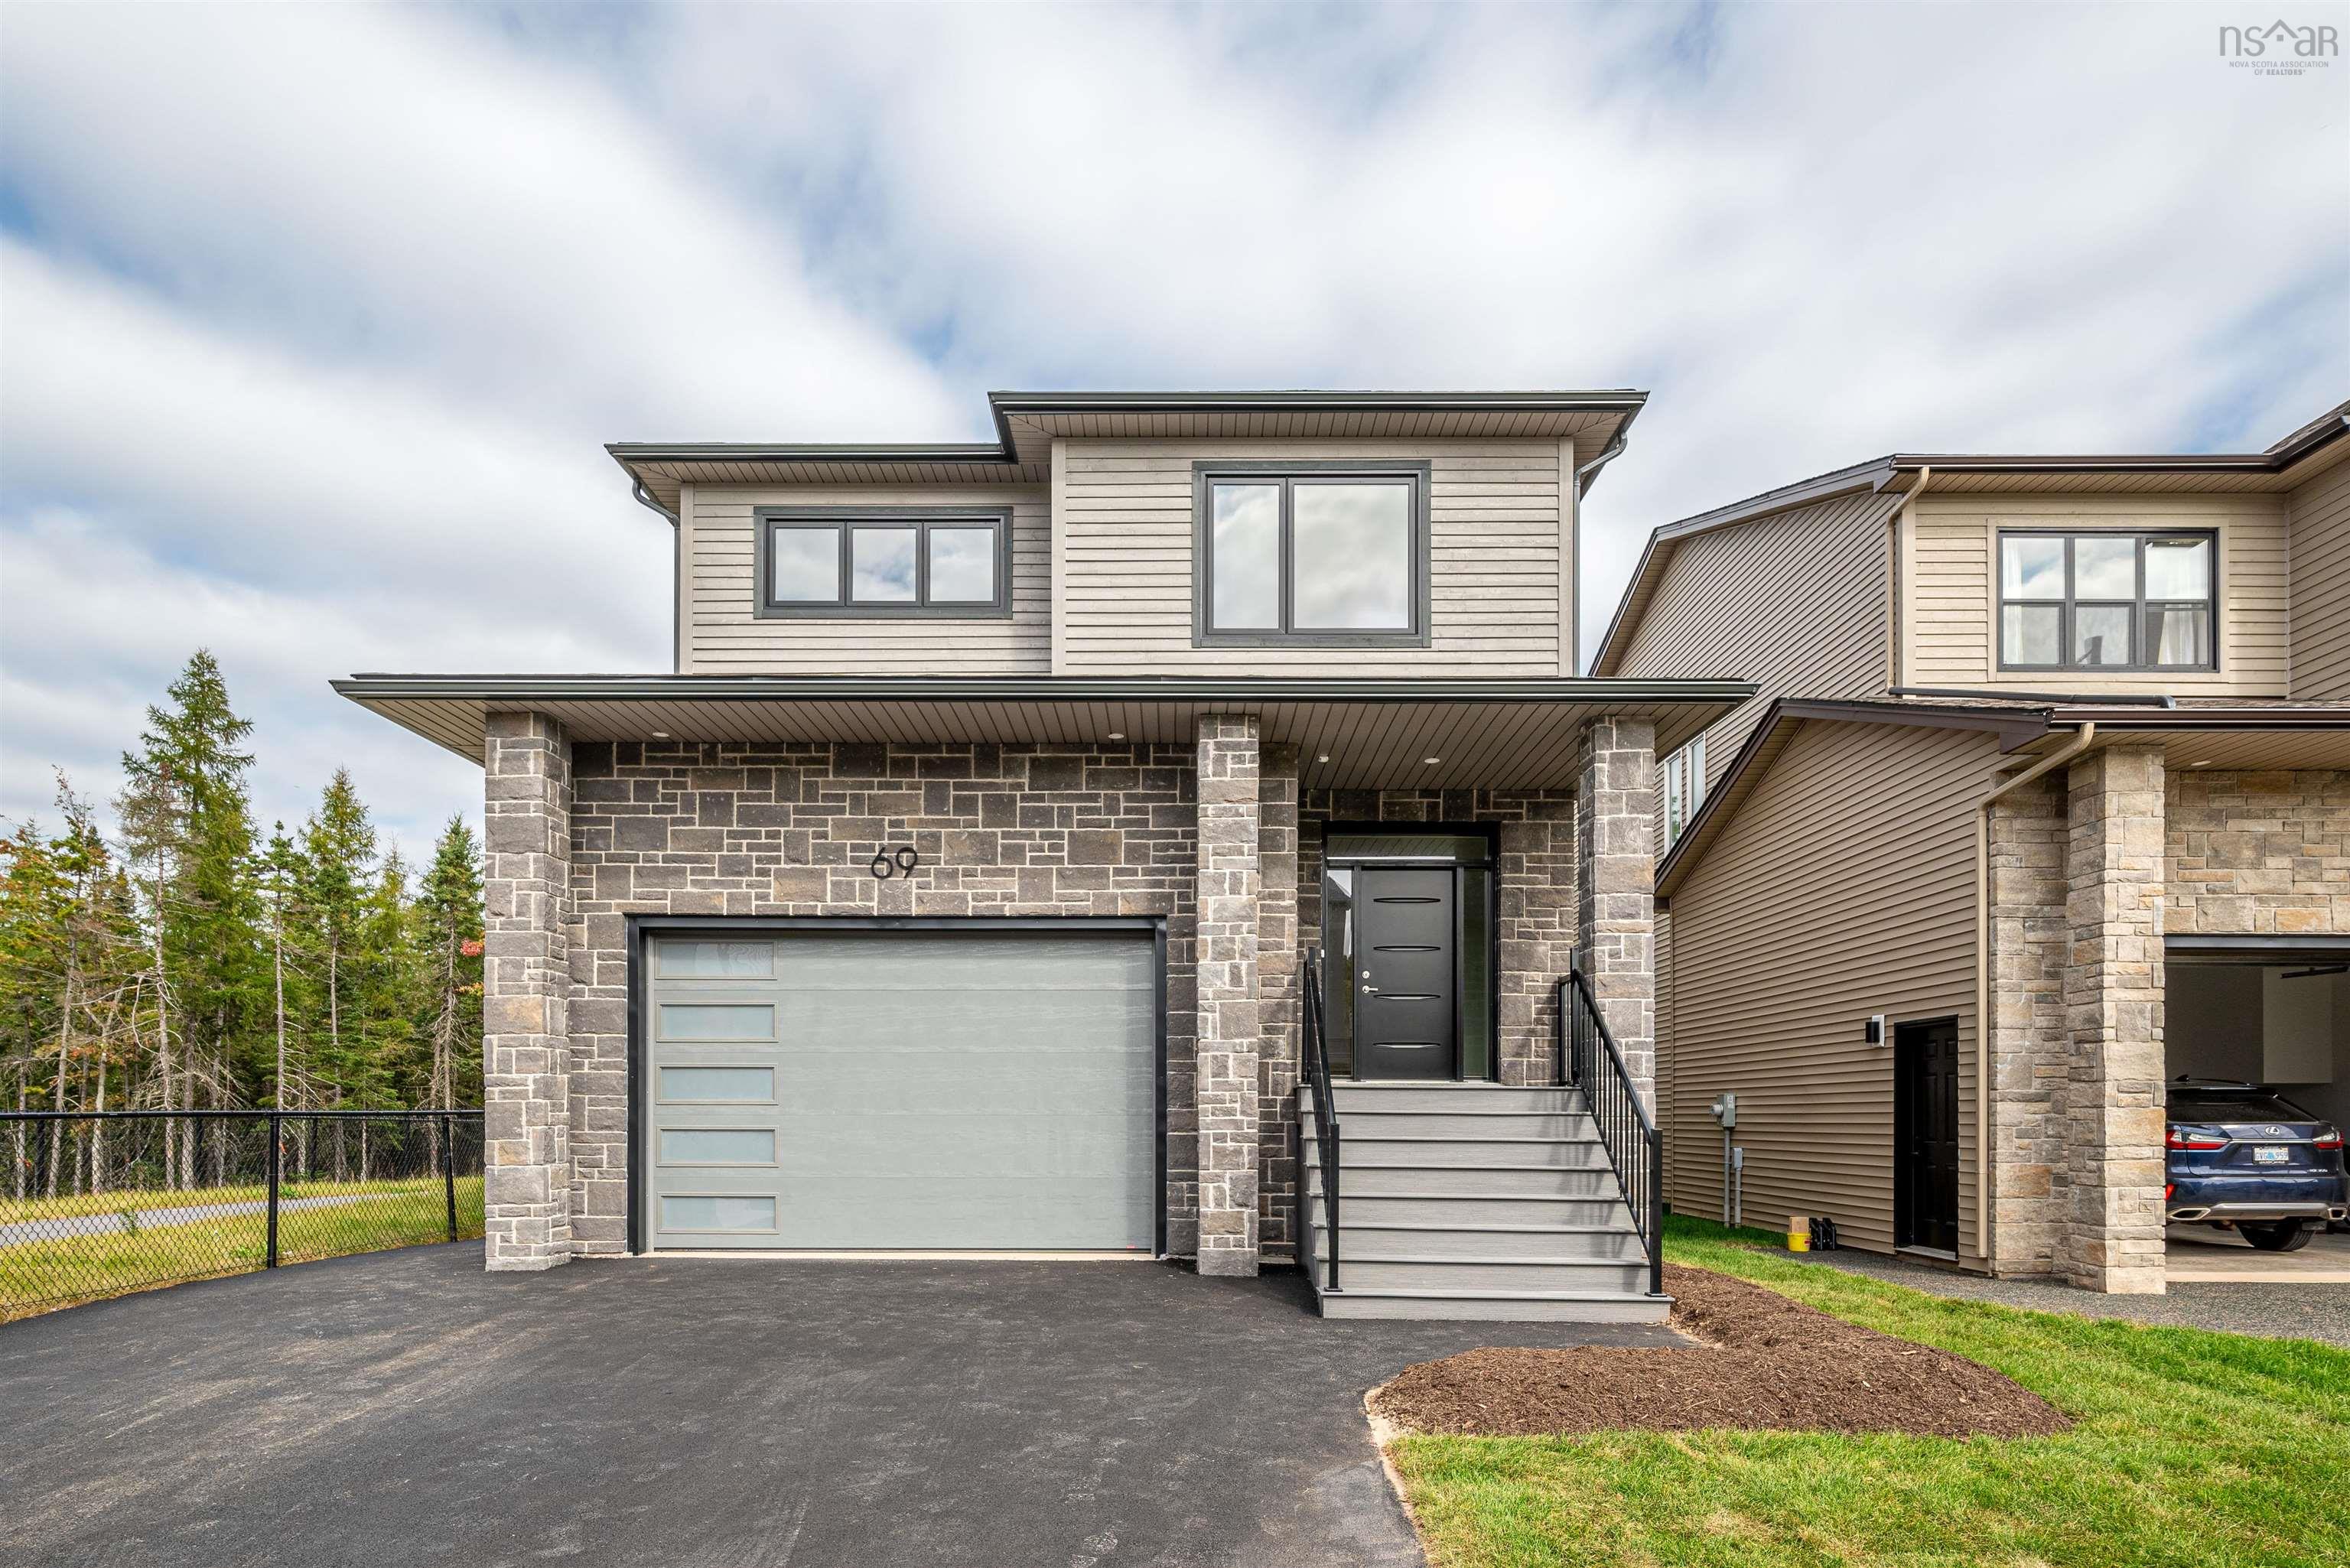 Pun 14 69 Puncheon Way, West Bedford NS - MLS<sup>®</sup>: # 202303337